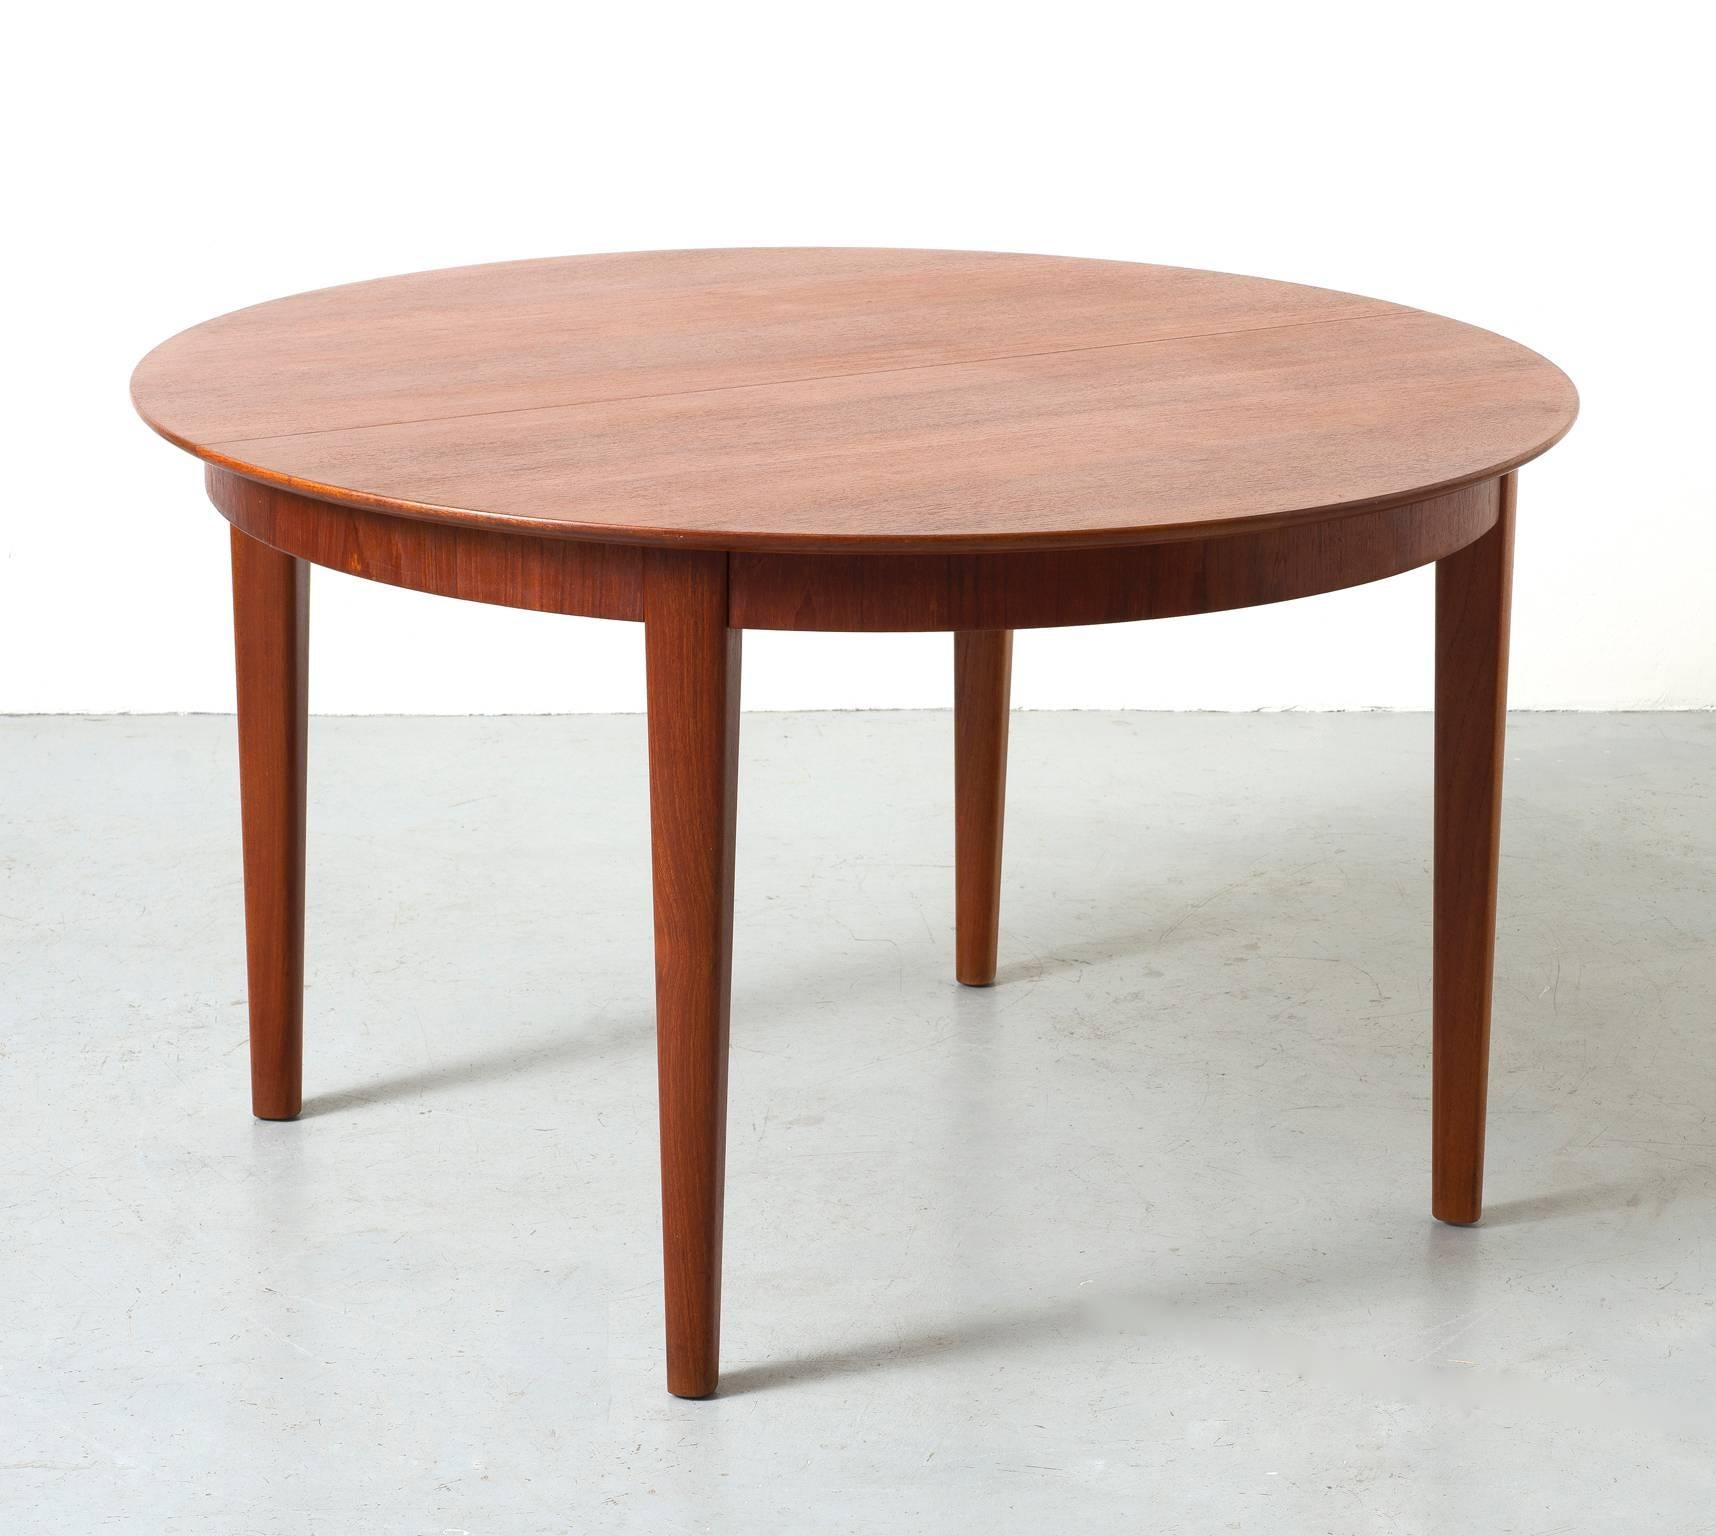 A Henning Kjaernulf teak dining table for Soro Stolefabrik.

Four additional leaves measuring 19.75 inches each. The table extends to 128 inches when fully extended.